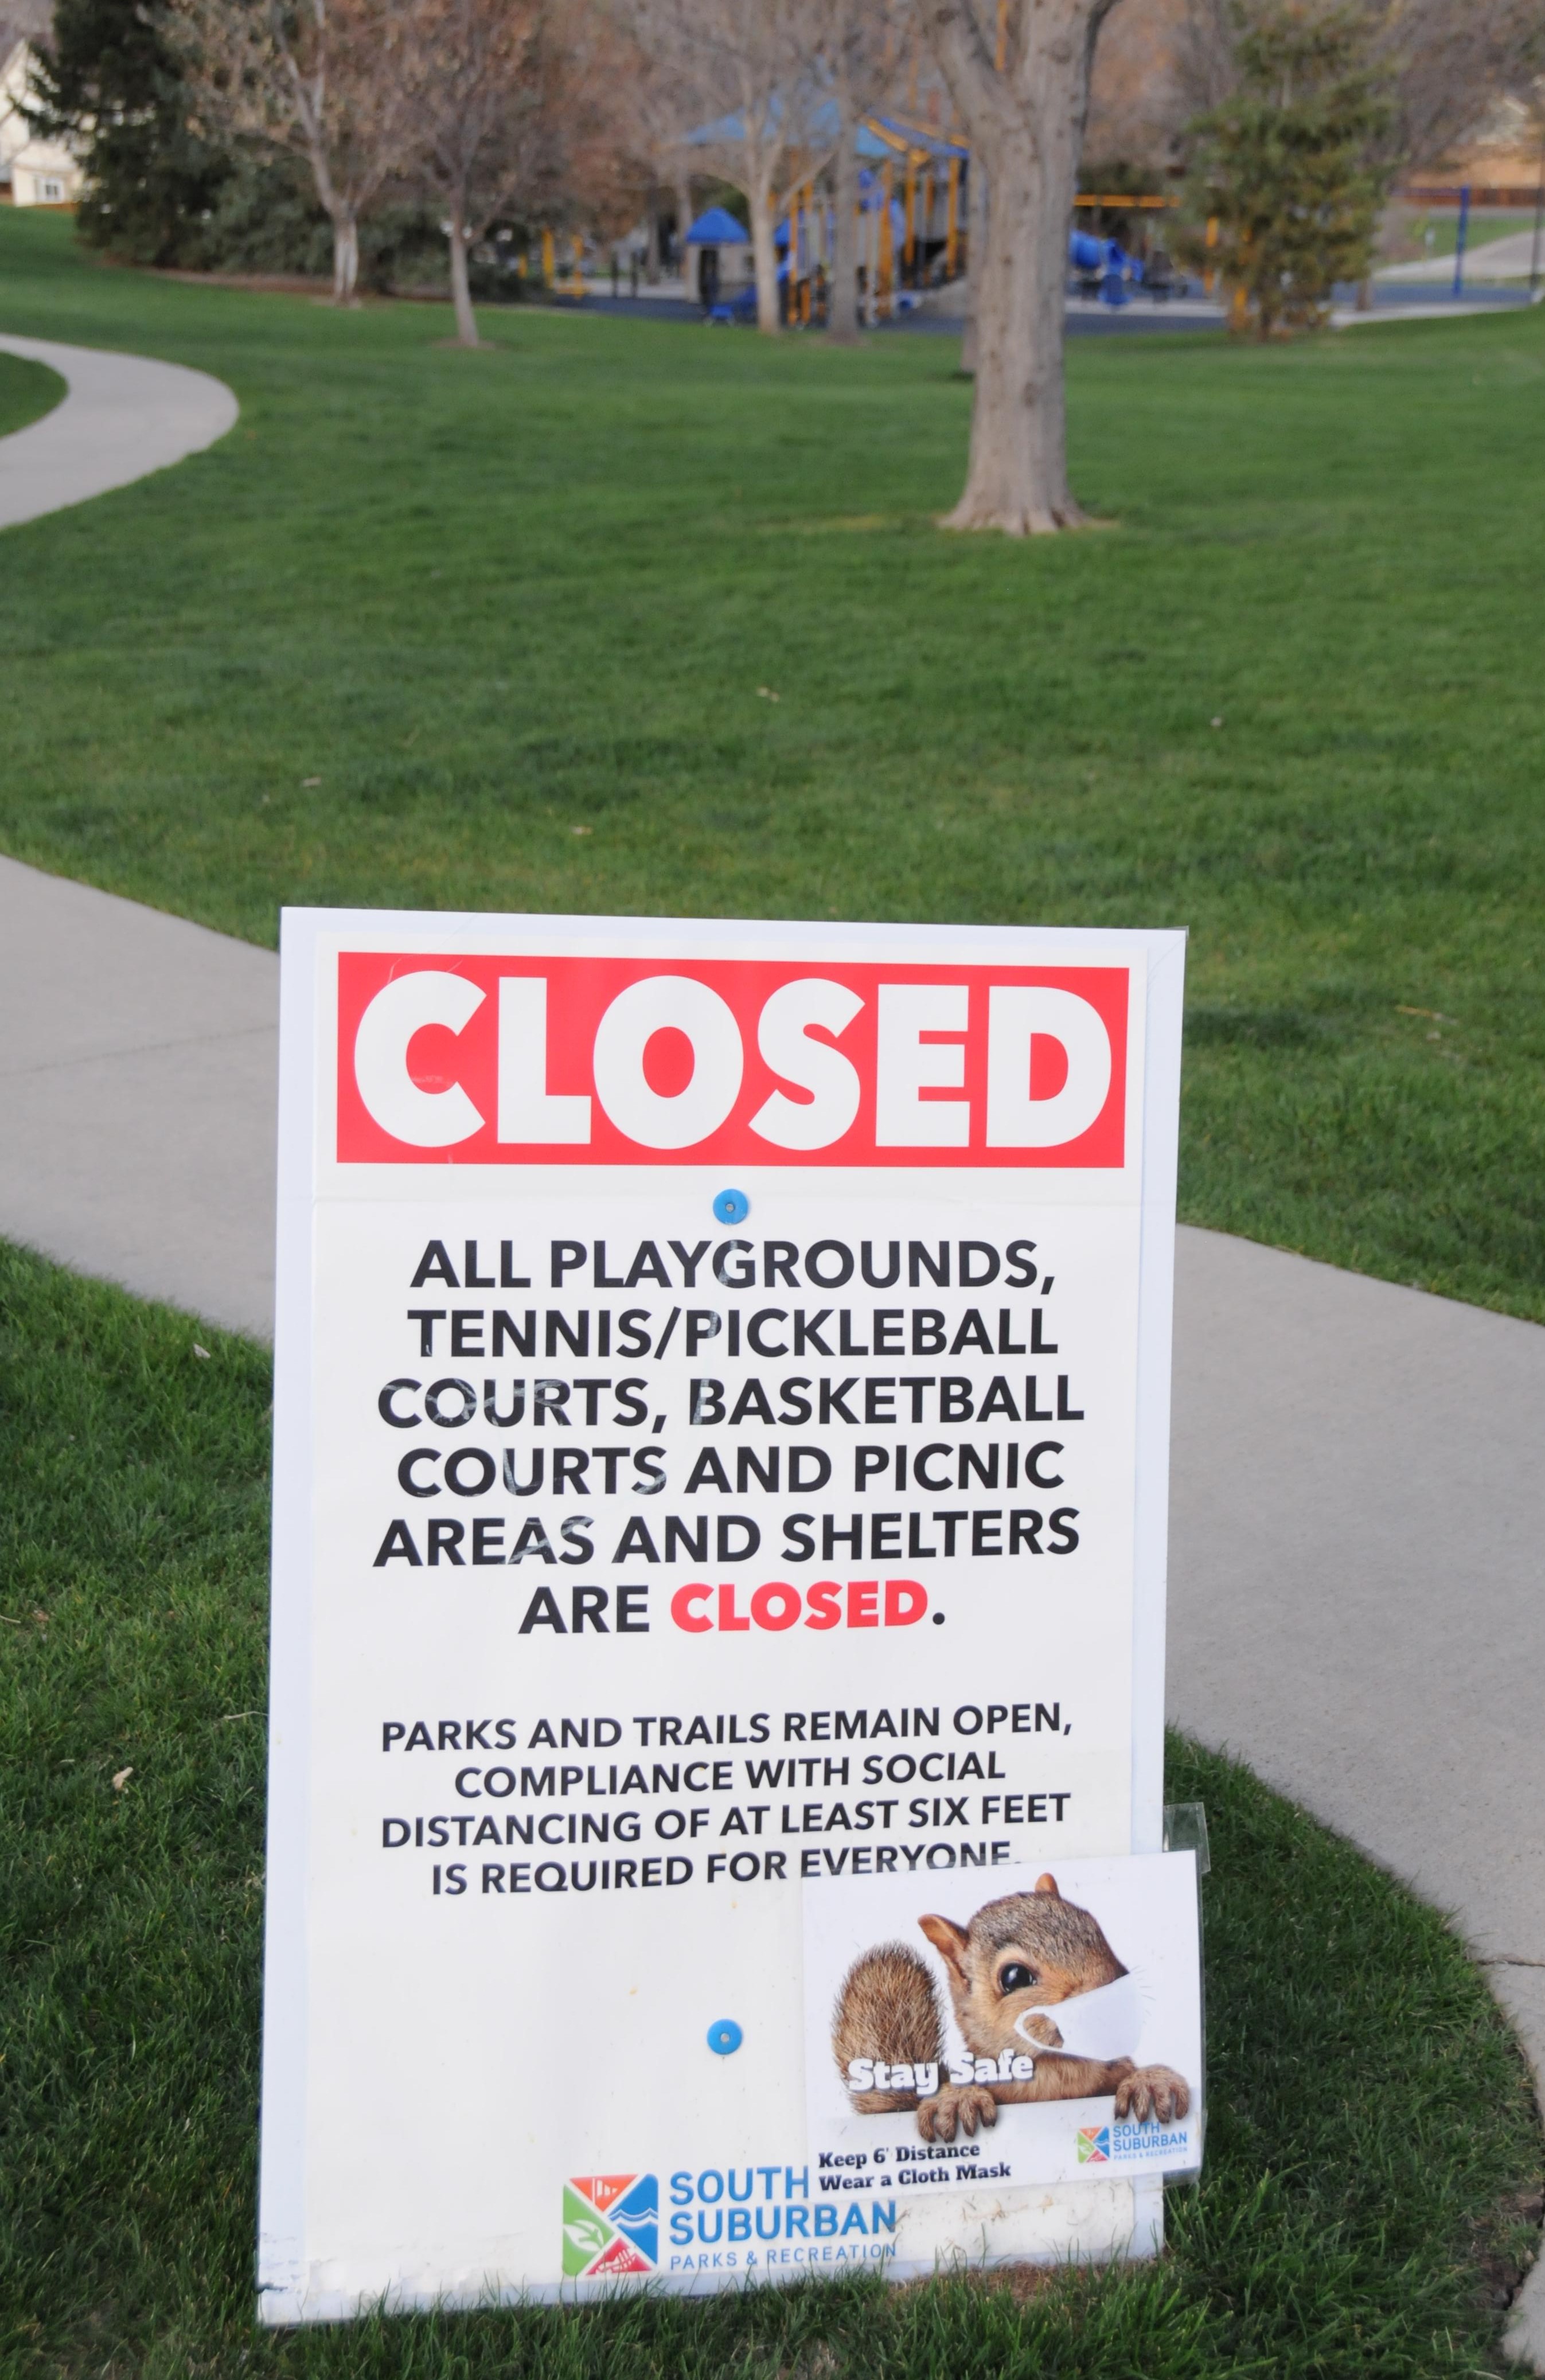 Photo of a sign posted in a park, indicating that the park has been closed due to pandemic protocols. It says," Closed: All playgrounds, tennis/pickleball courts, basketball courts, and picnic areas and shelters are closed. Parks and trails remain open, compliance with social distancing of at least 6 feet is required for everyone." There is a photo of a squirrel wearing a face mask at the bottom of the sign.